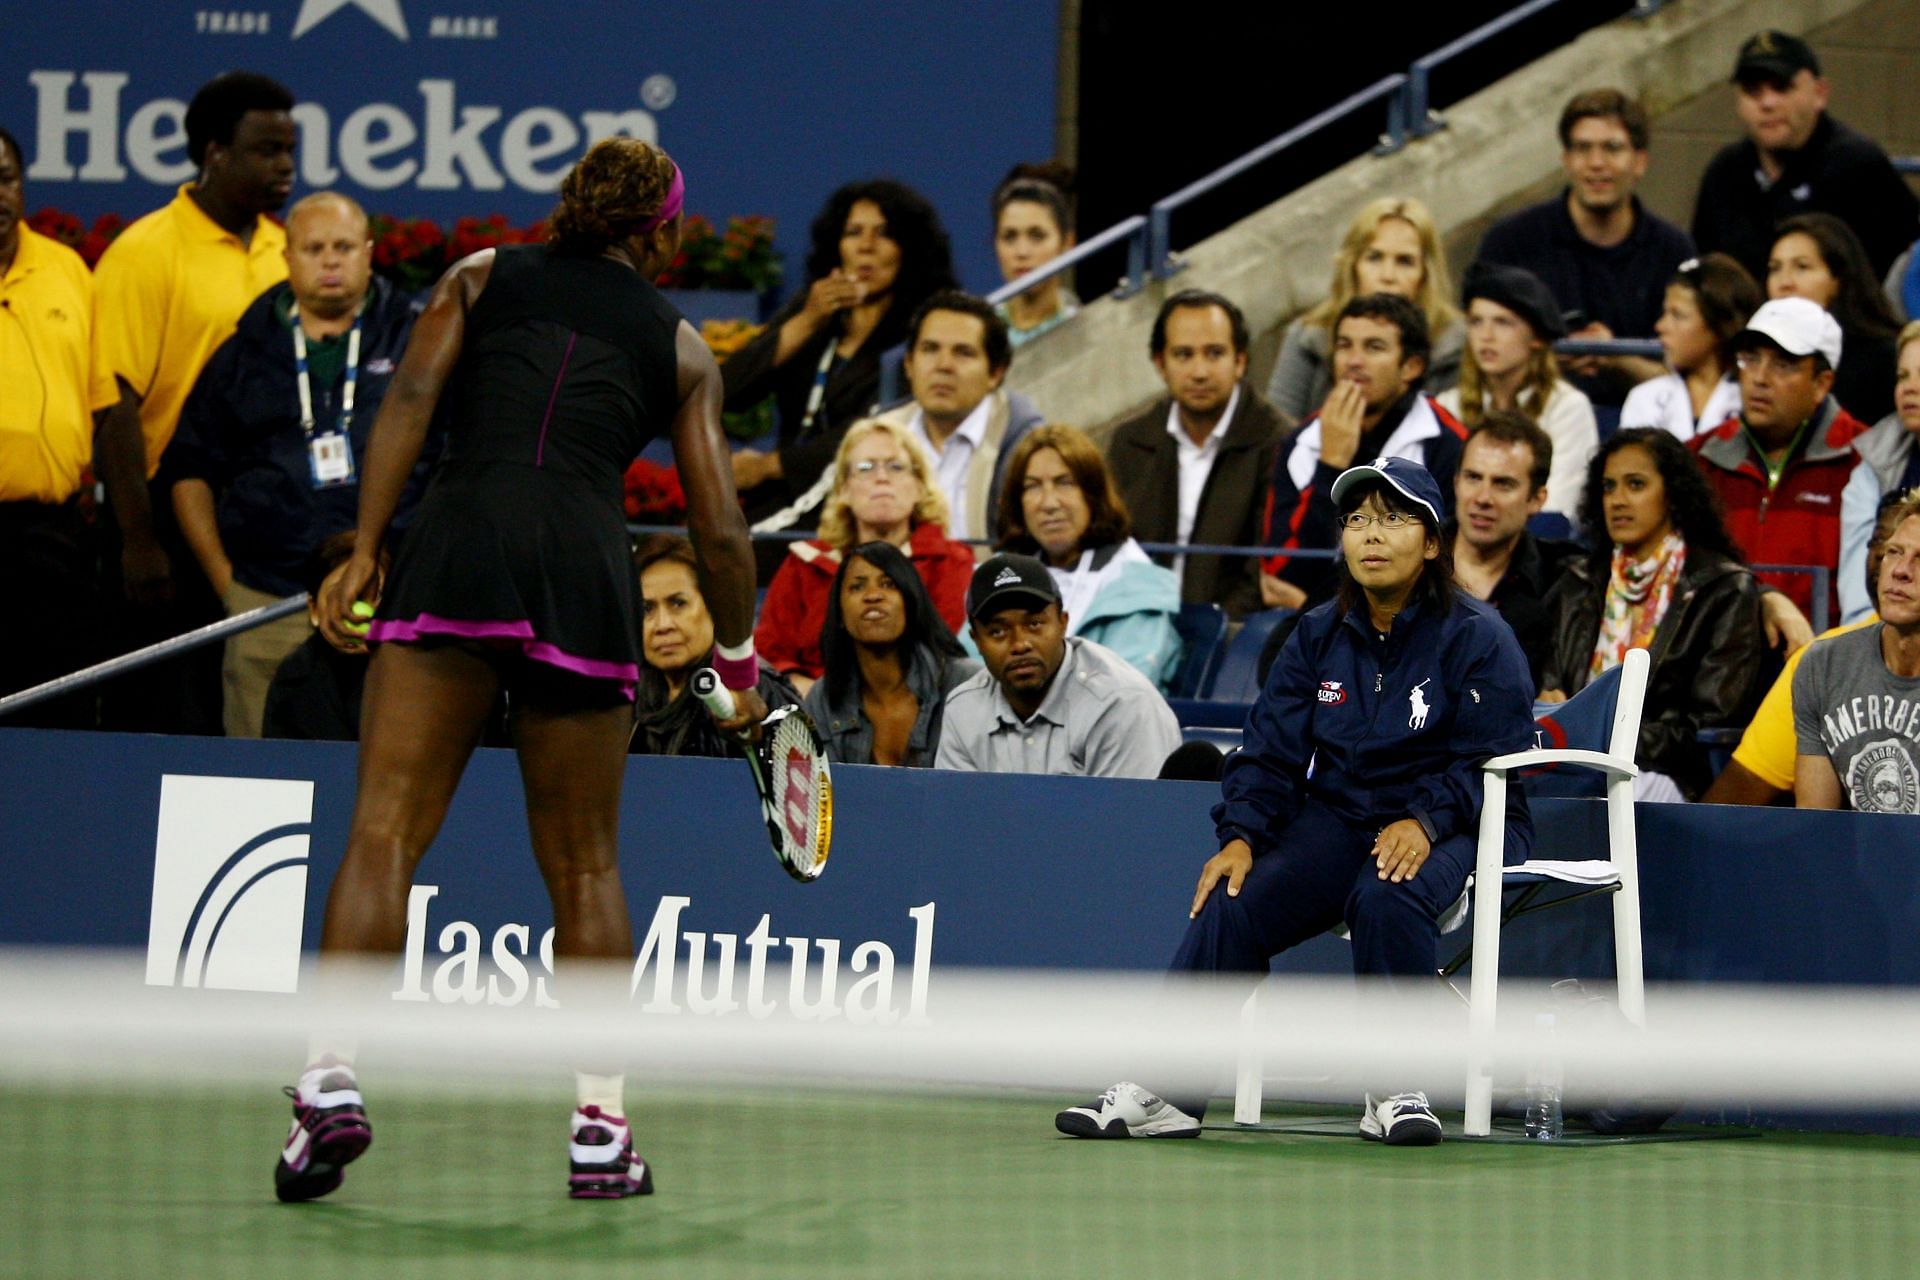 Serena Williams at the 2009 US Open